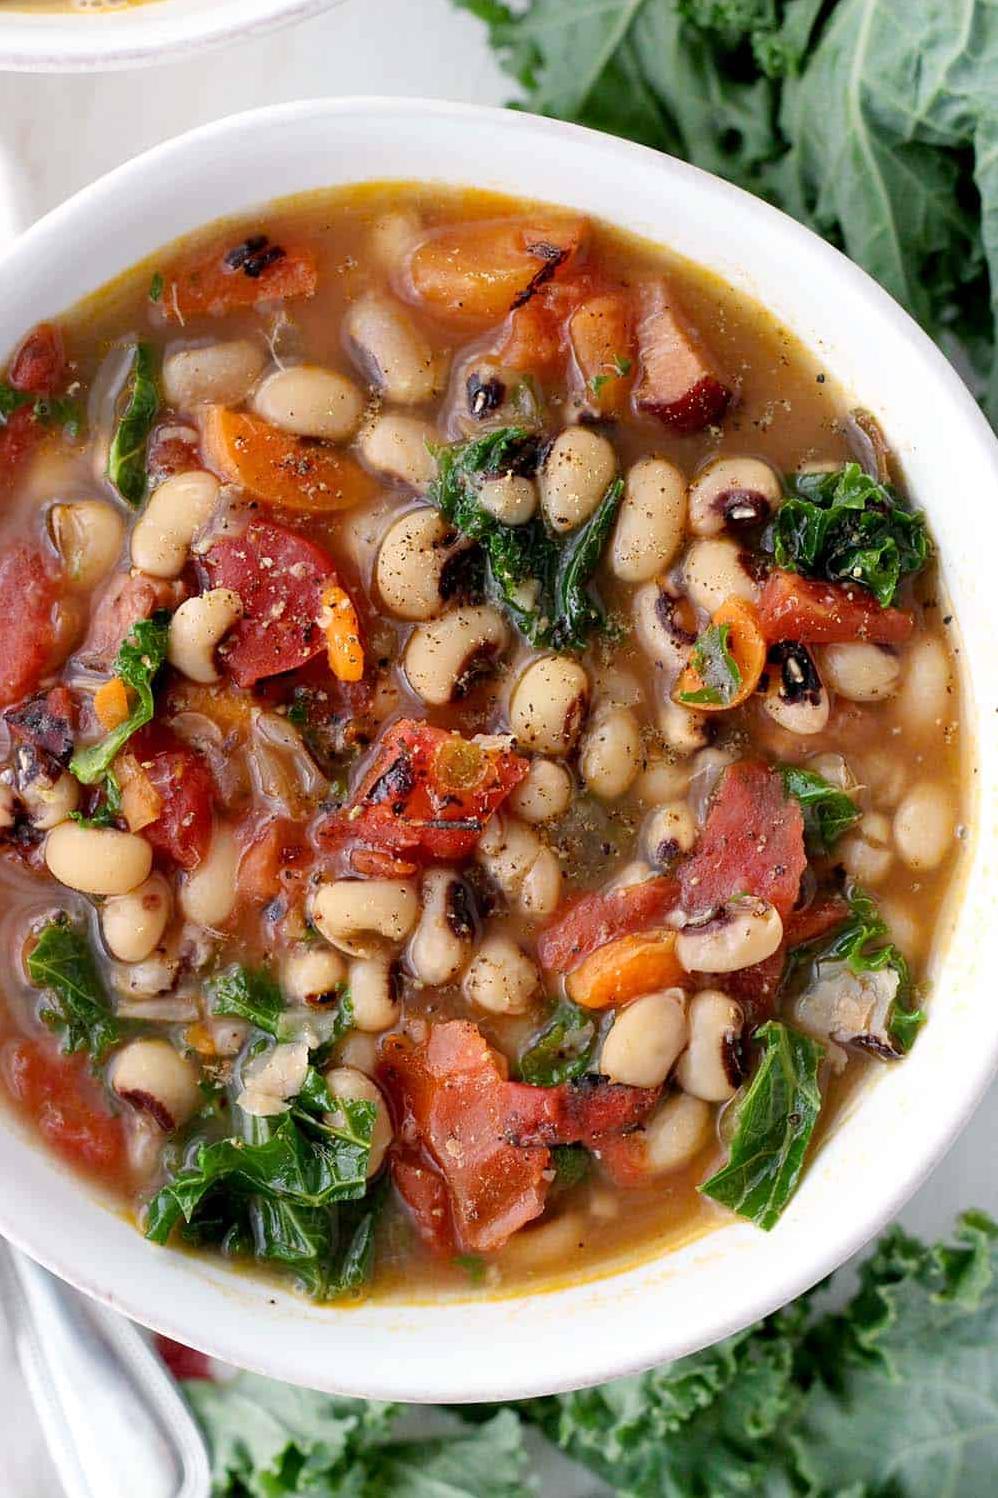  This delicious soup is packed with protein and fiber, keeping you feeling full for hours.